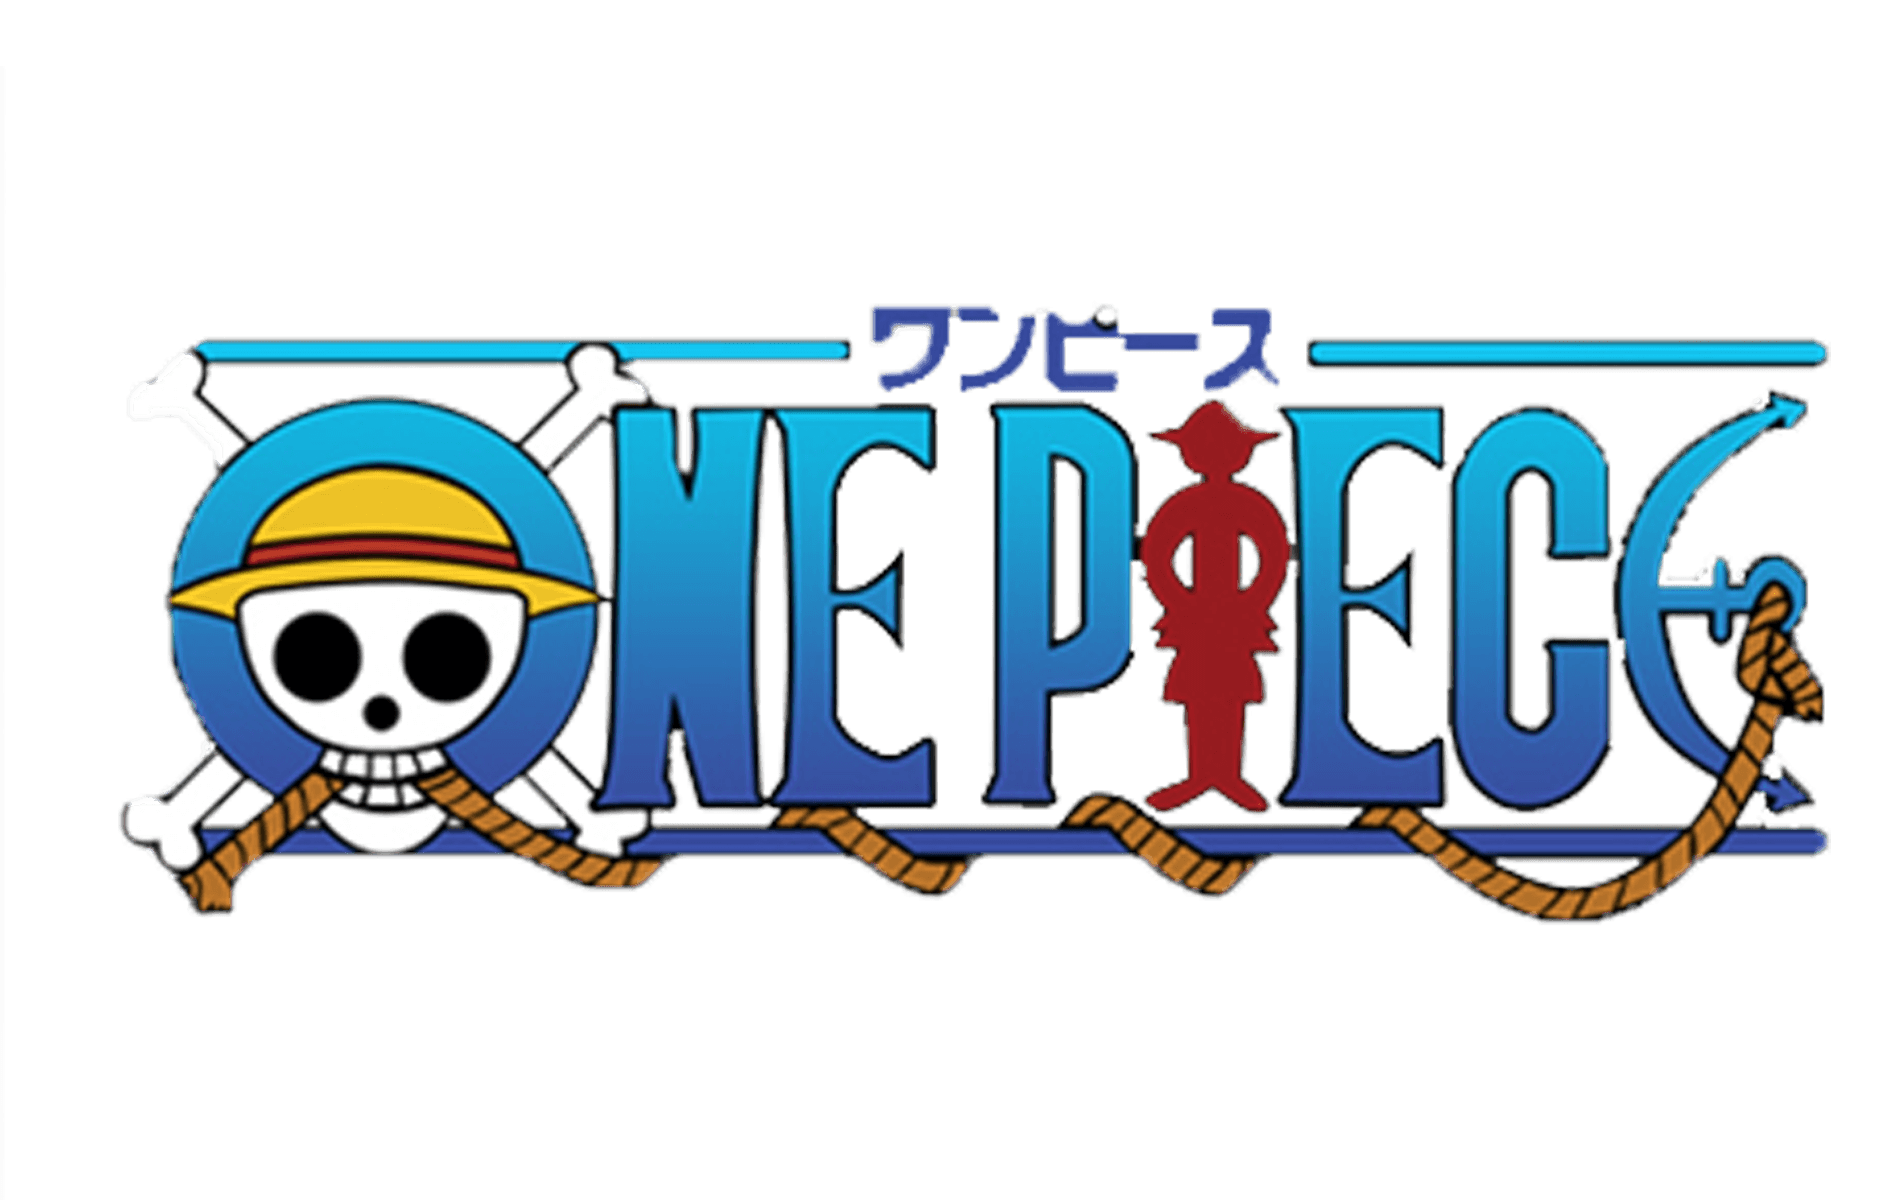 One Piece Logo Wallpaper , Find HD Wallpaper For Free